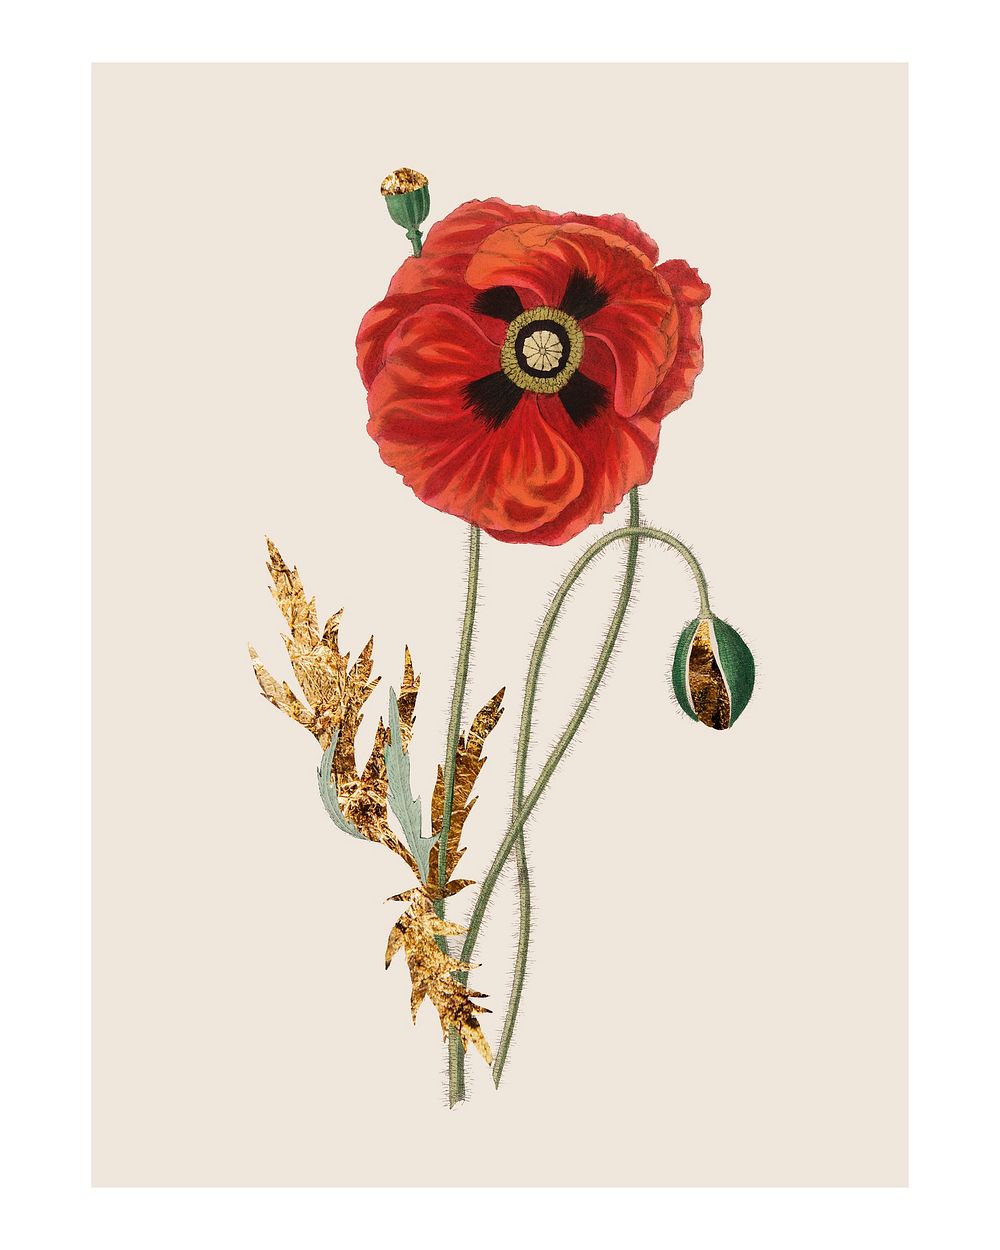 Common poppy vintage illustration wall art print and poster.